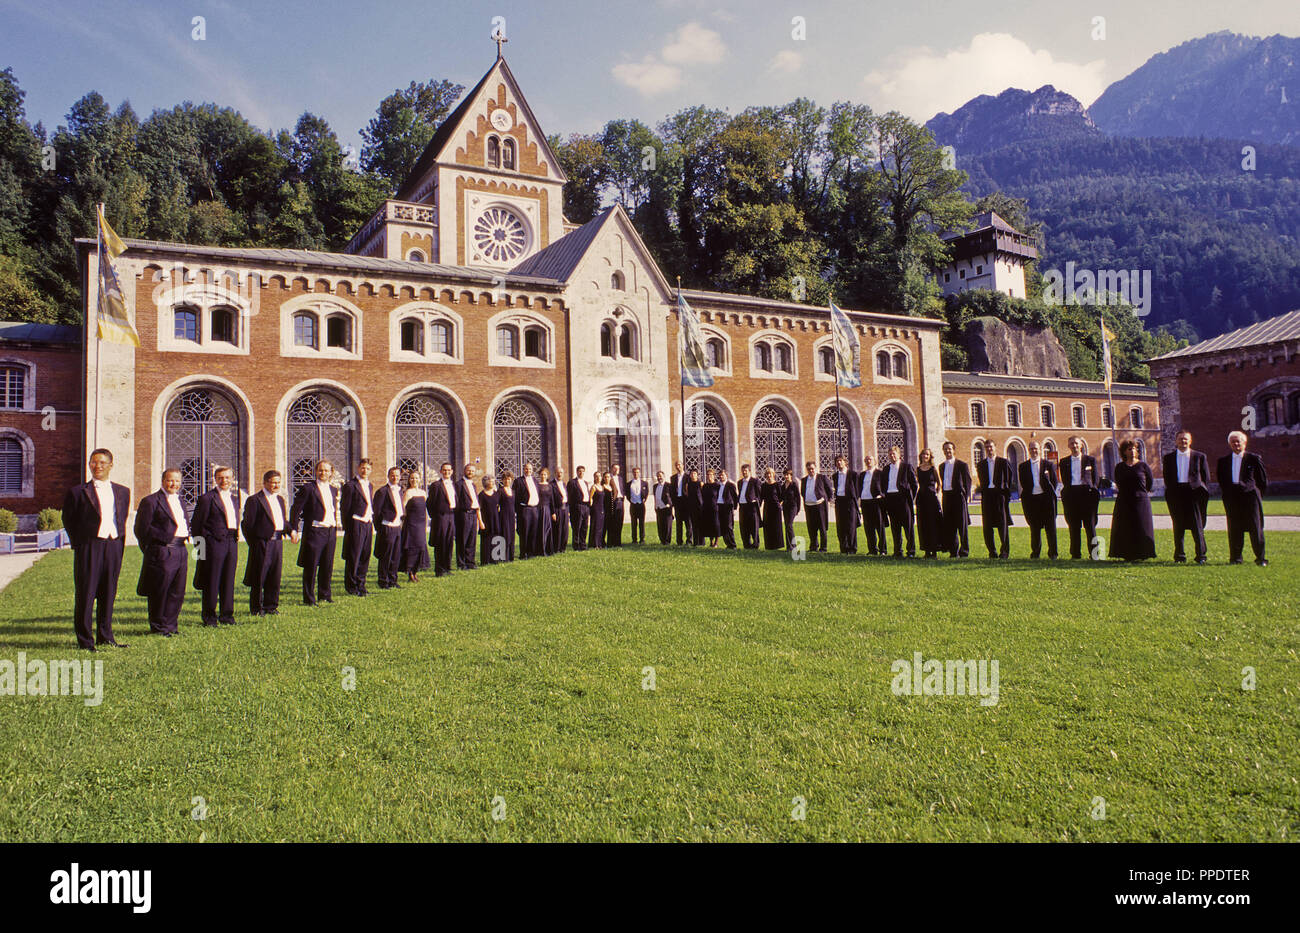 Philharmonic orchestra in front of the Old Salt Works in Bad Reichenhall,  Berchtesgadener Land Germany Stock Photo - Alamy